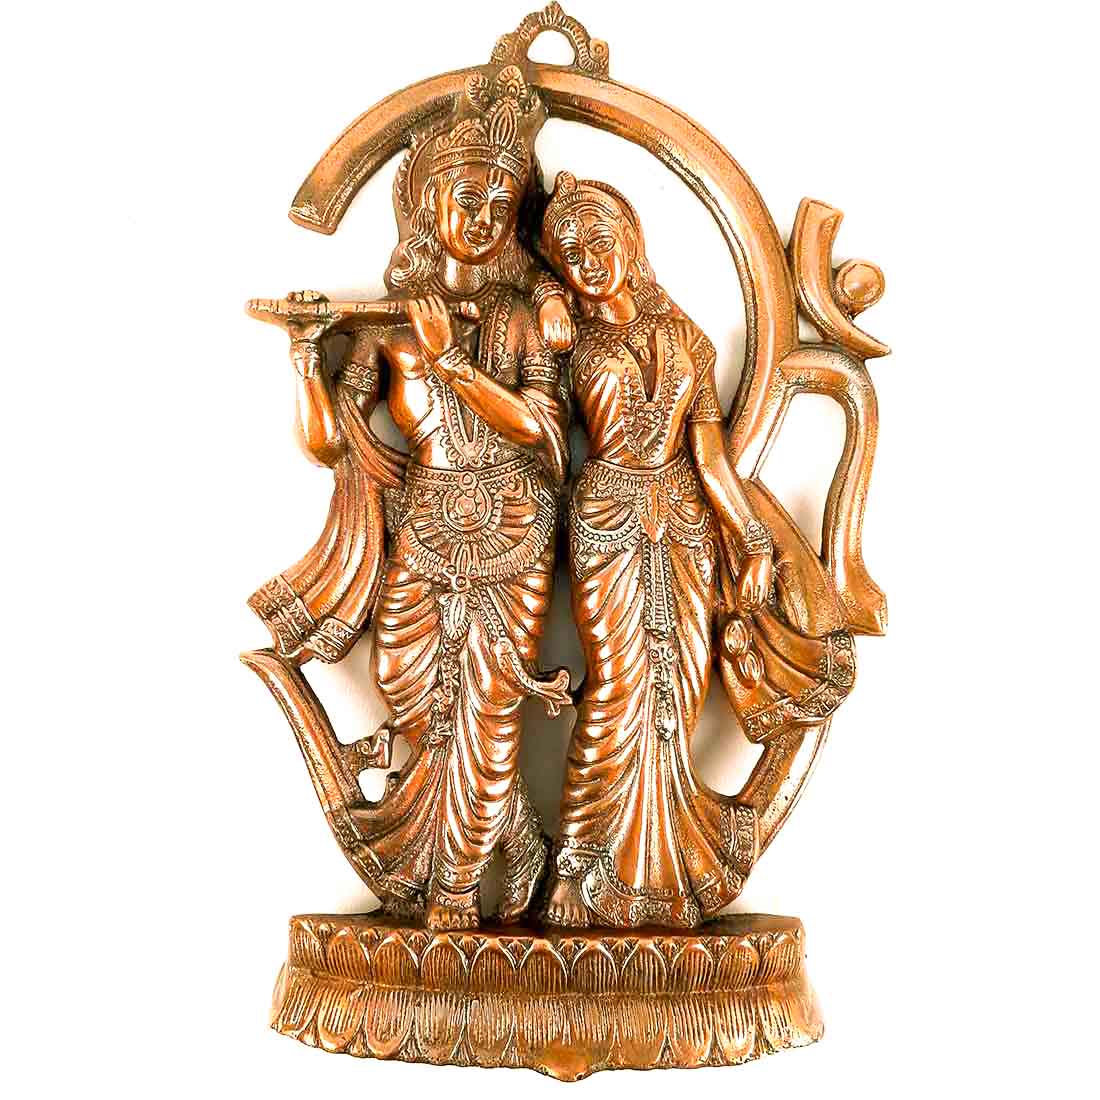 Radha Krishna Murti Wall Hanging | Shri Radhe Krishna Playing Flute With Om Wall Art Statue Idol  - for Home, Living Room, Office, Puja , Entrance Decoration & Gifts - 25 inch